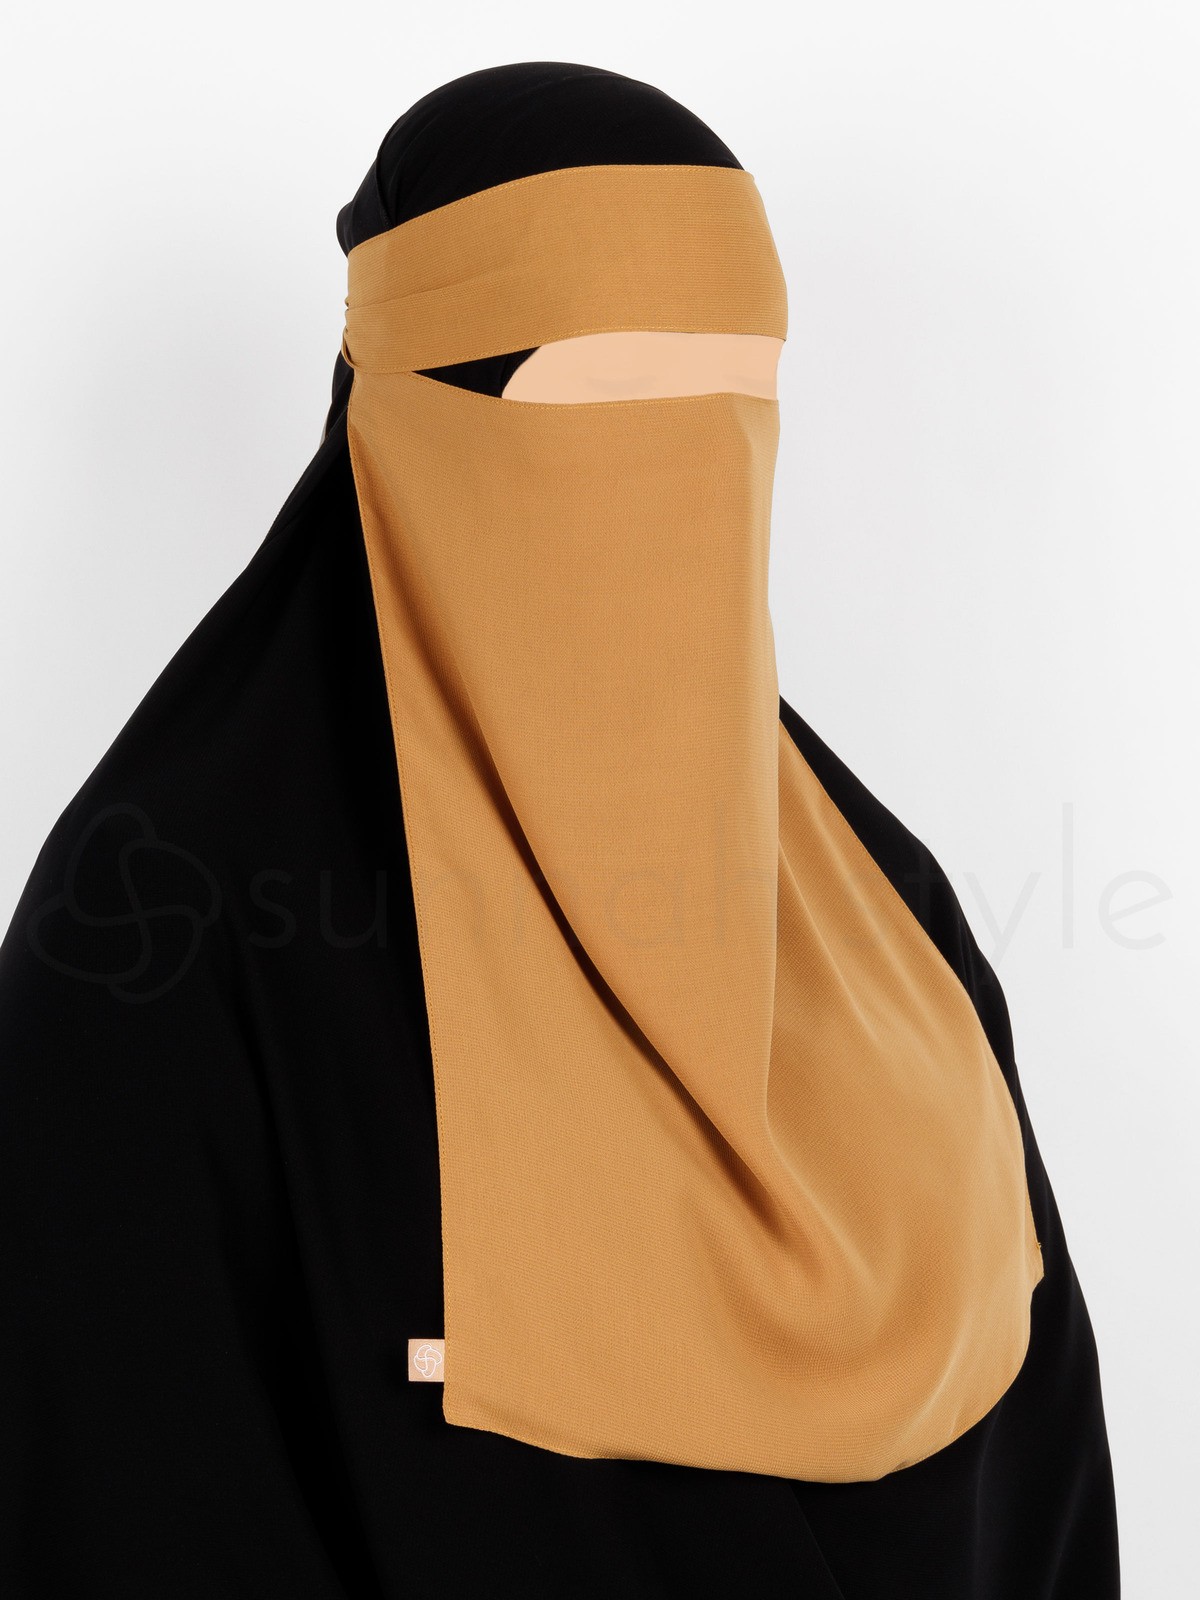 Sunnah Style - Pull-Down One Layer Niqab (Honey)